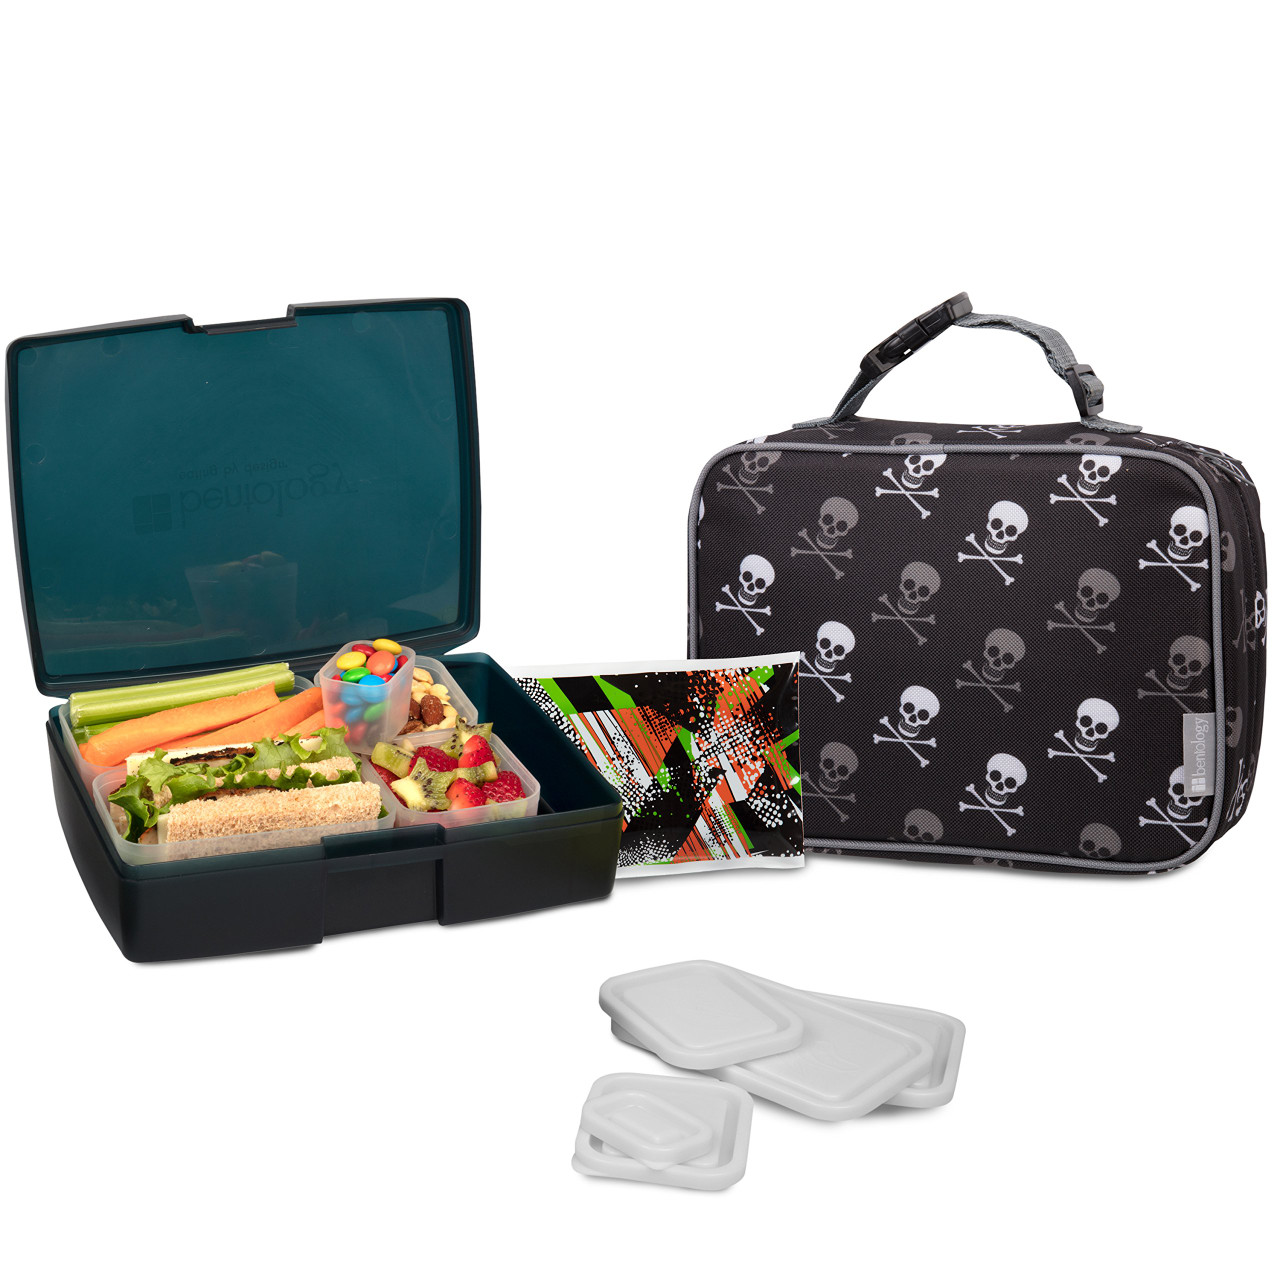 Bentology Lunch Bag and Box Set for Kids - Boys Insulated Lunchbox Tote, Bento Box, 5 Containers and Ice Pack - 9 Pieces - Pirate Skulls